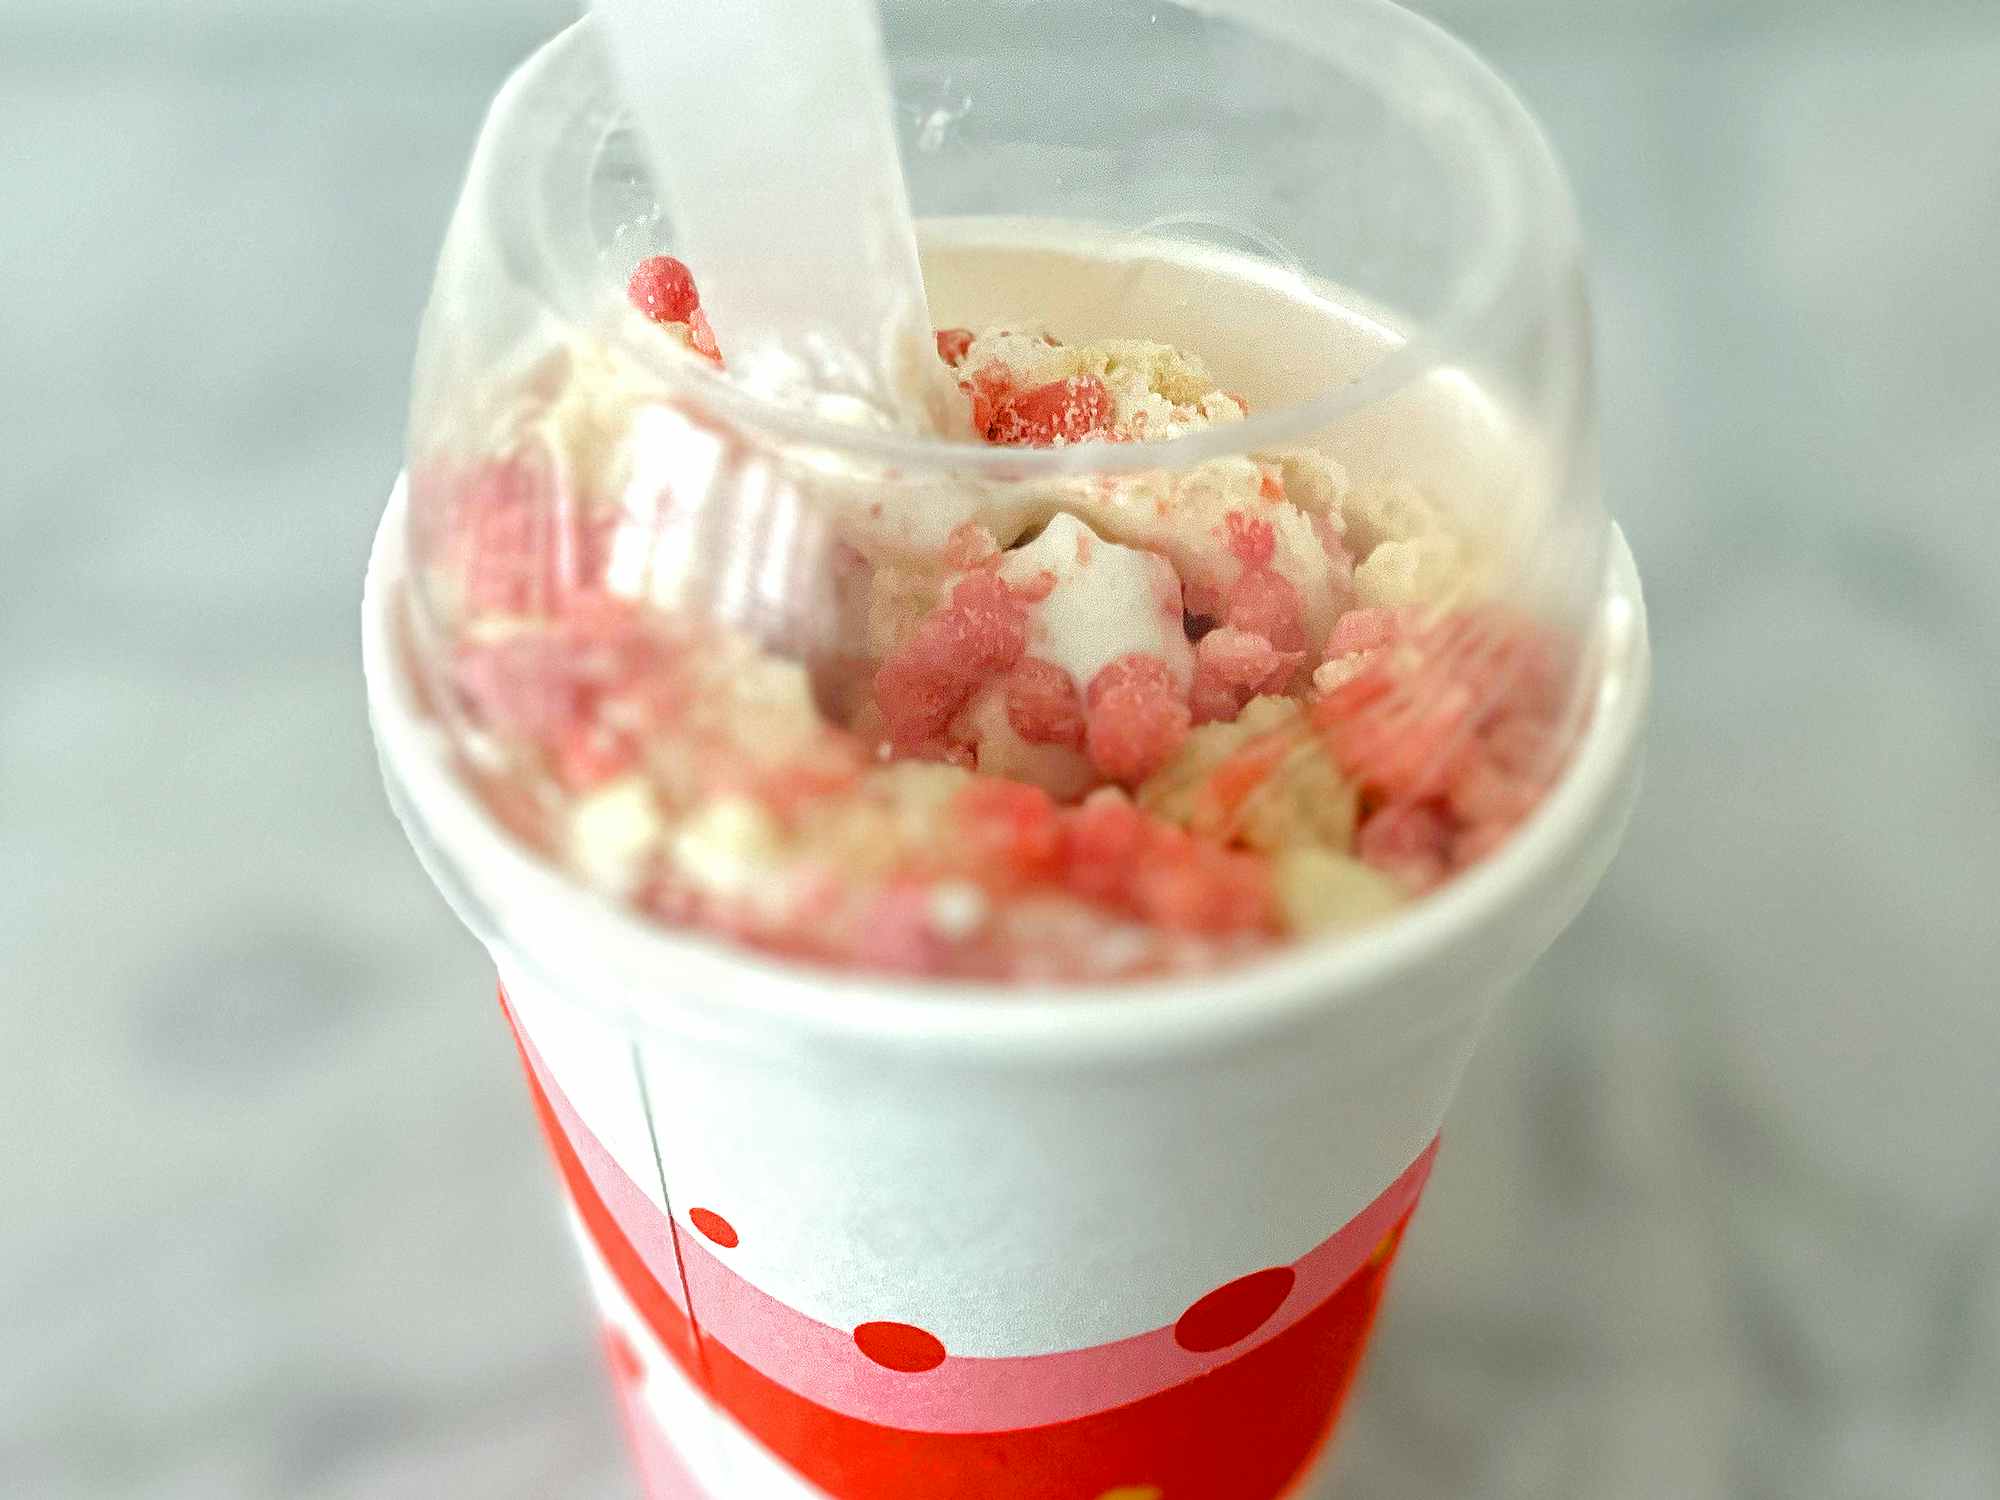 limited-time mcdonalds strawberry shortcake mcflurry with toppings on table